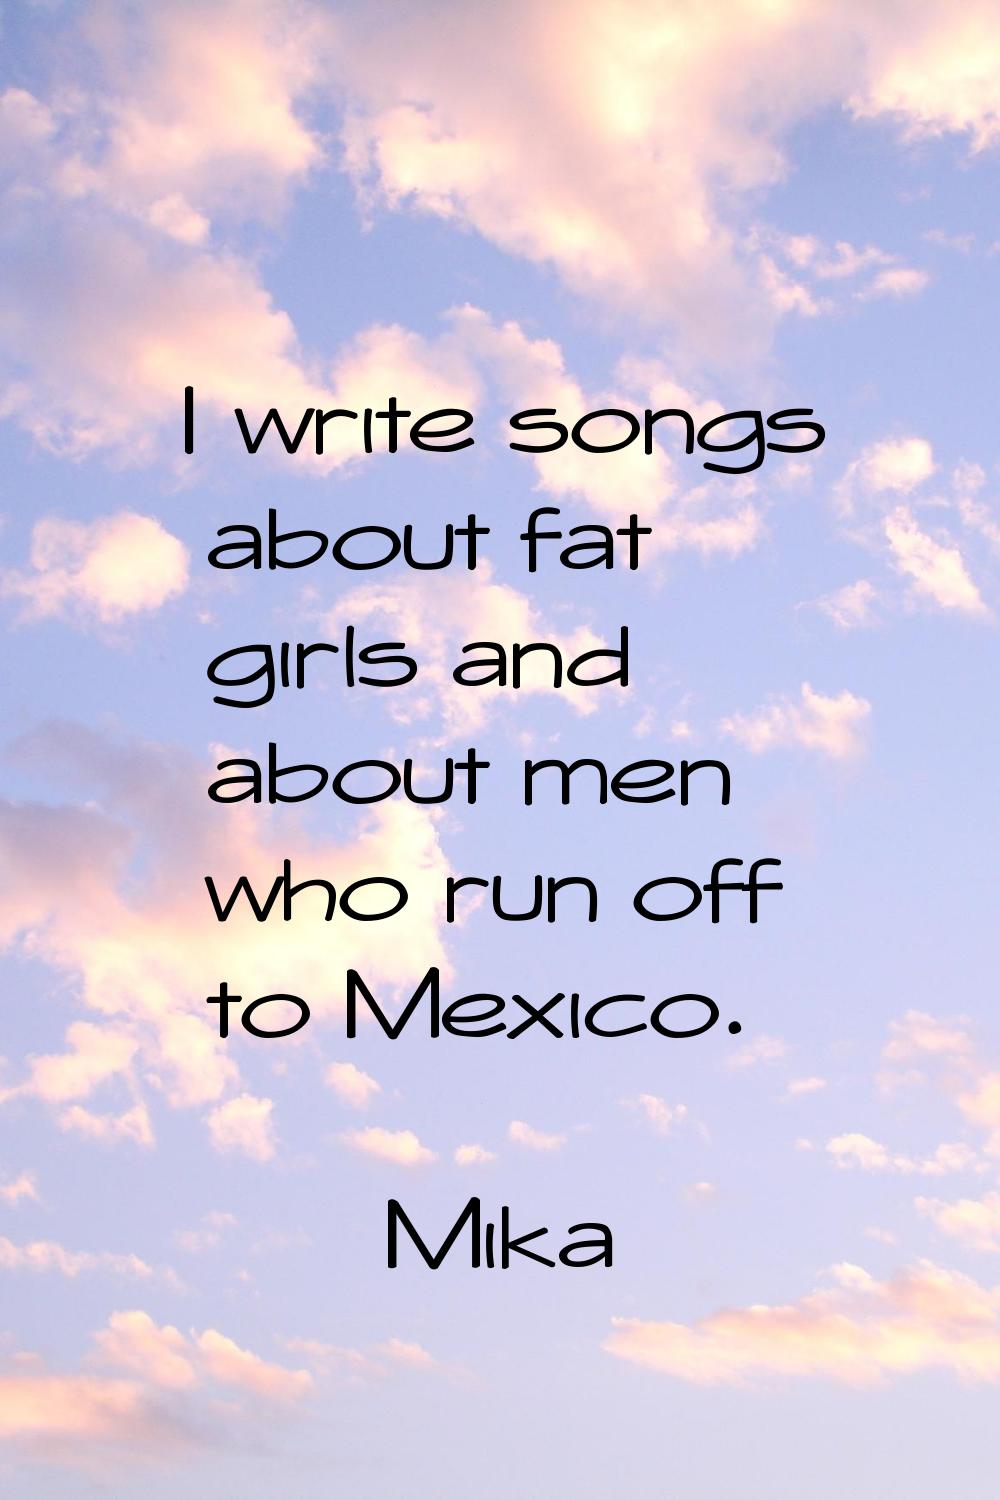 I write songs about fat girls and about men who run off to Mexico.